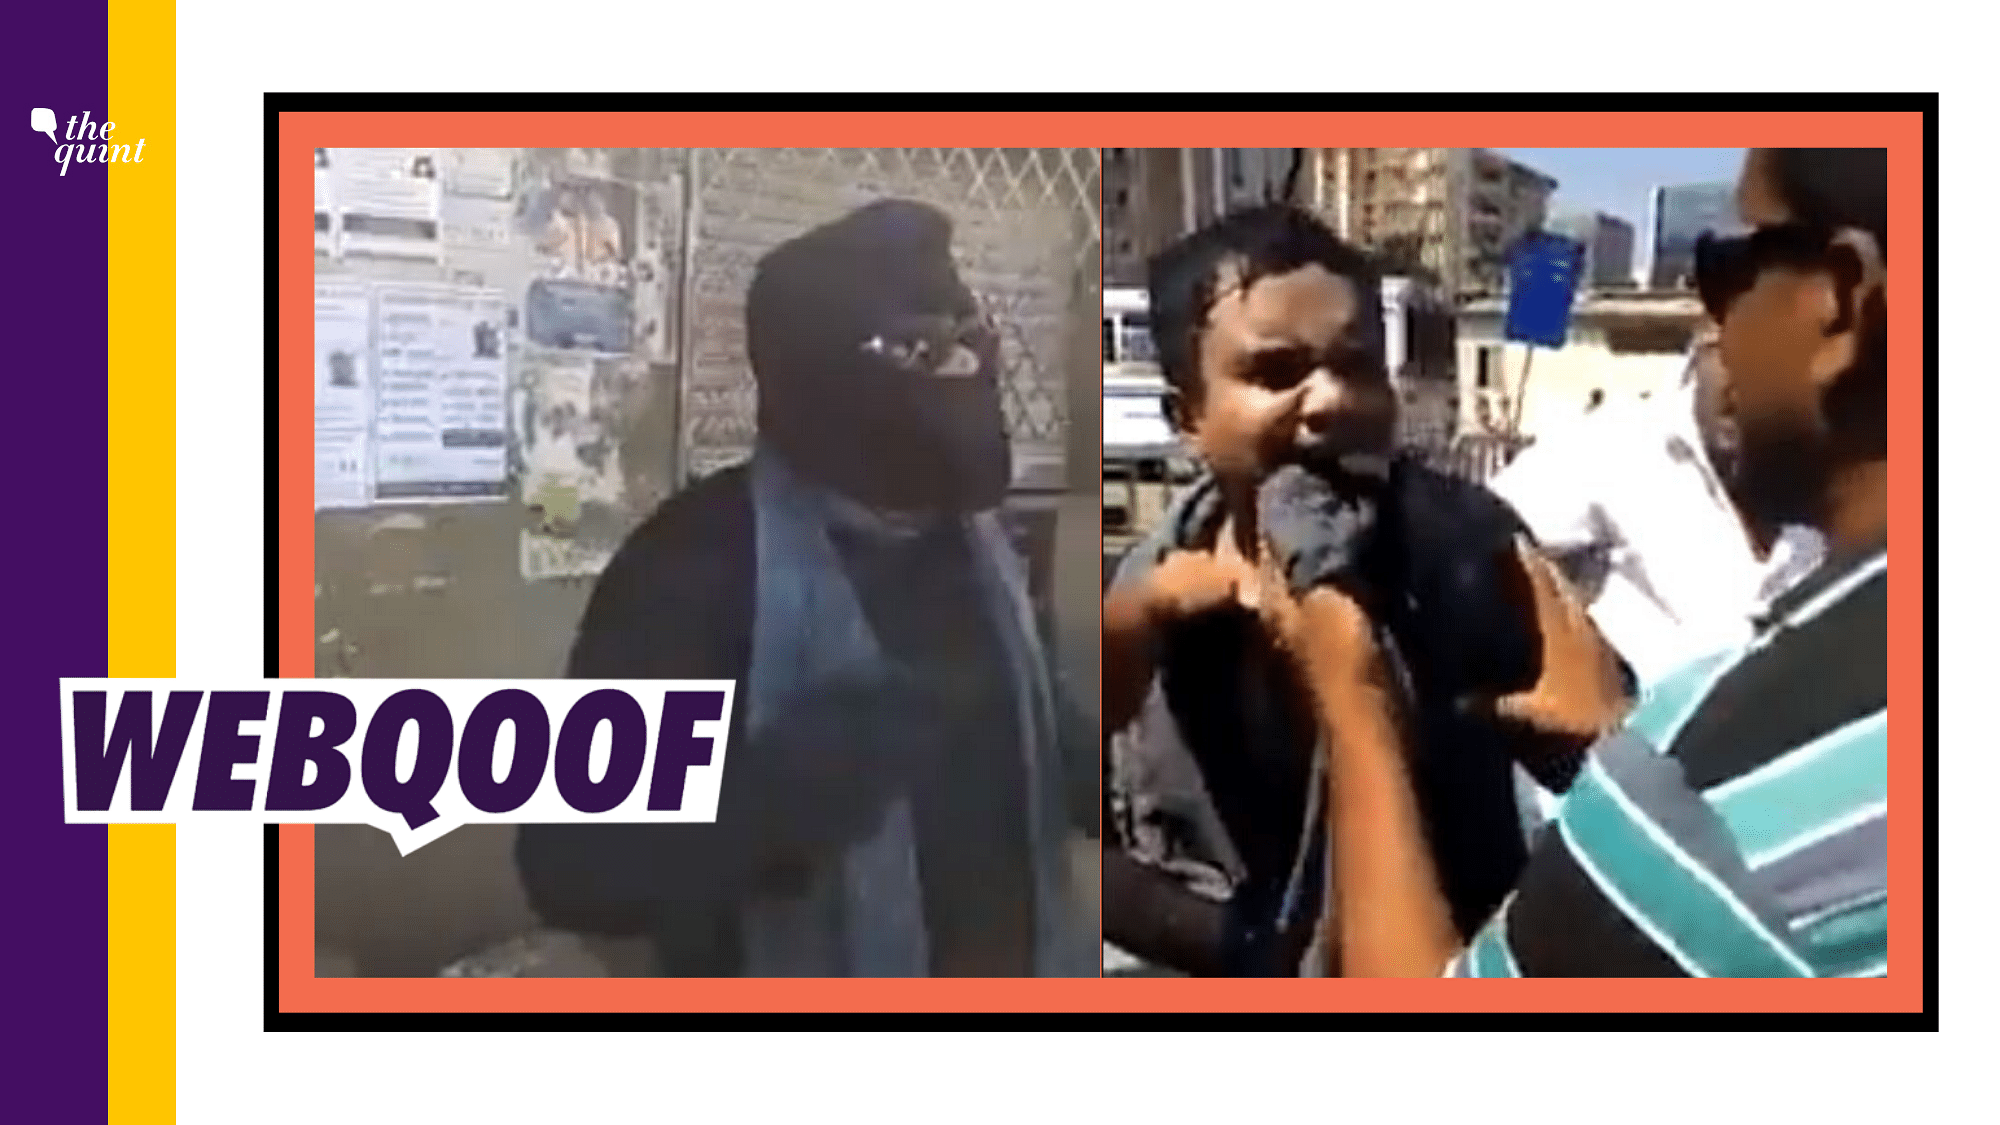 A video of a man wearing a burqa is in circulation with the claim that it shows an RSS worker who was caught wearing a burqa in a Muslim area.